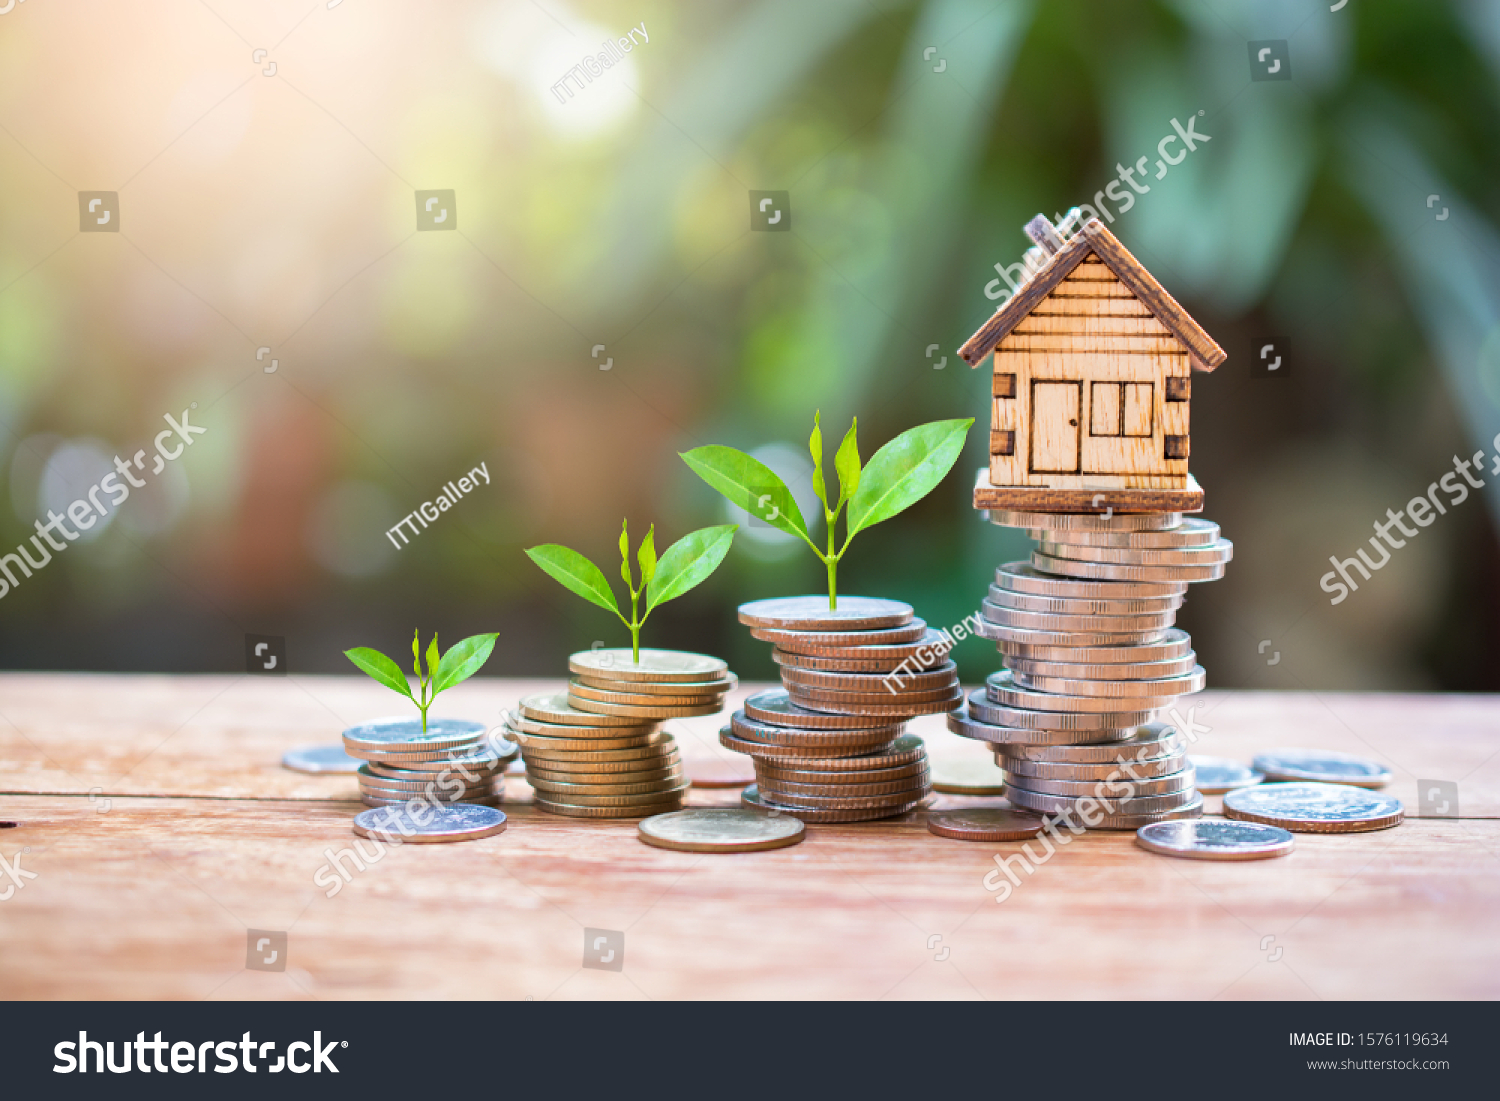 house model on money coins saving for concept investment mortgage fund finance and home loan refinance #1576119634